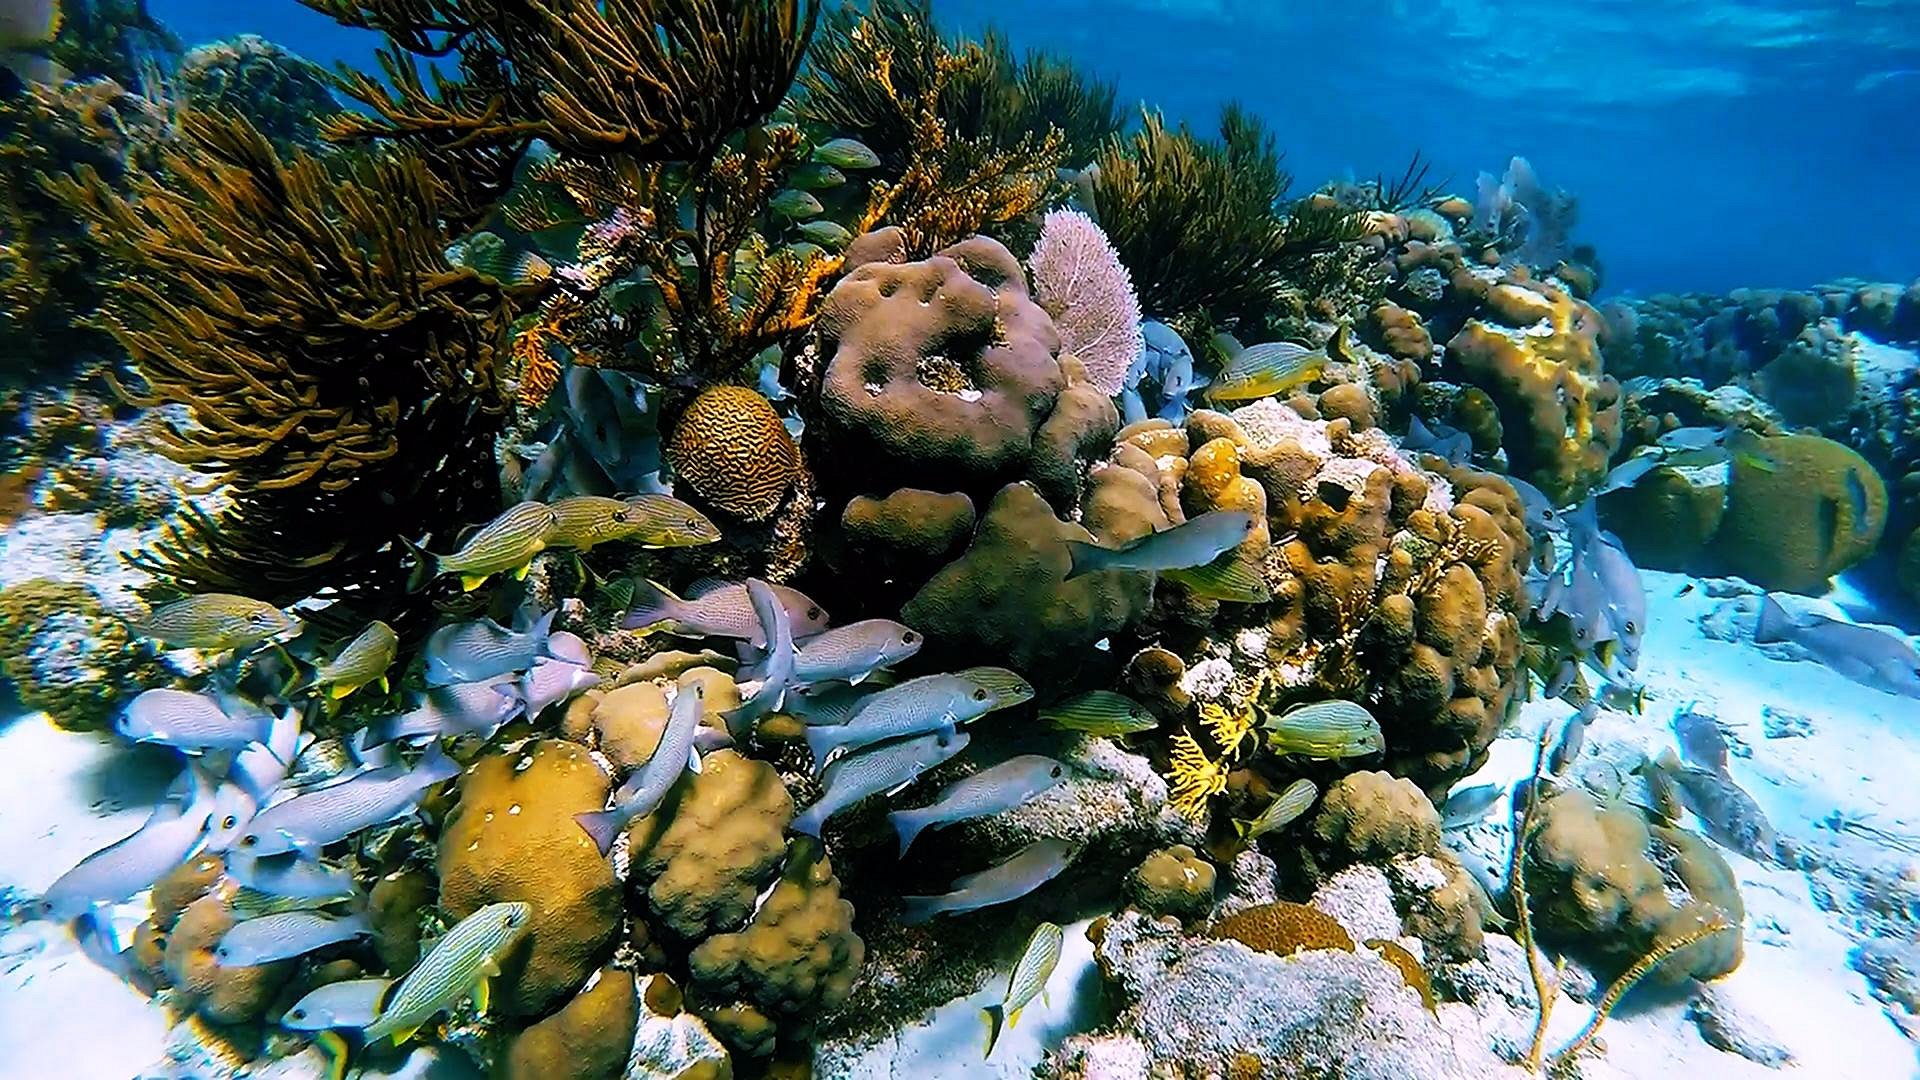 Glover's Reef